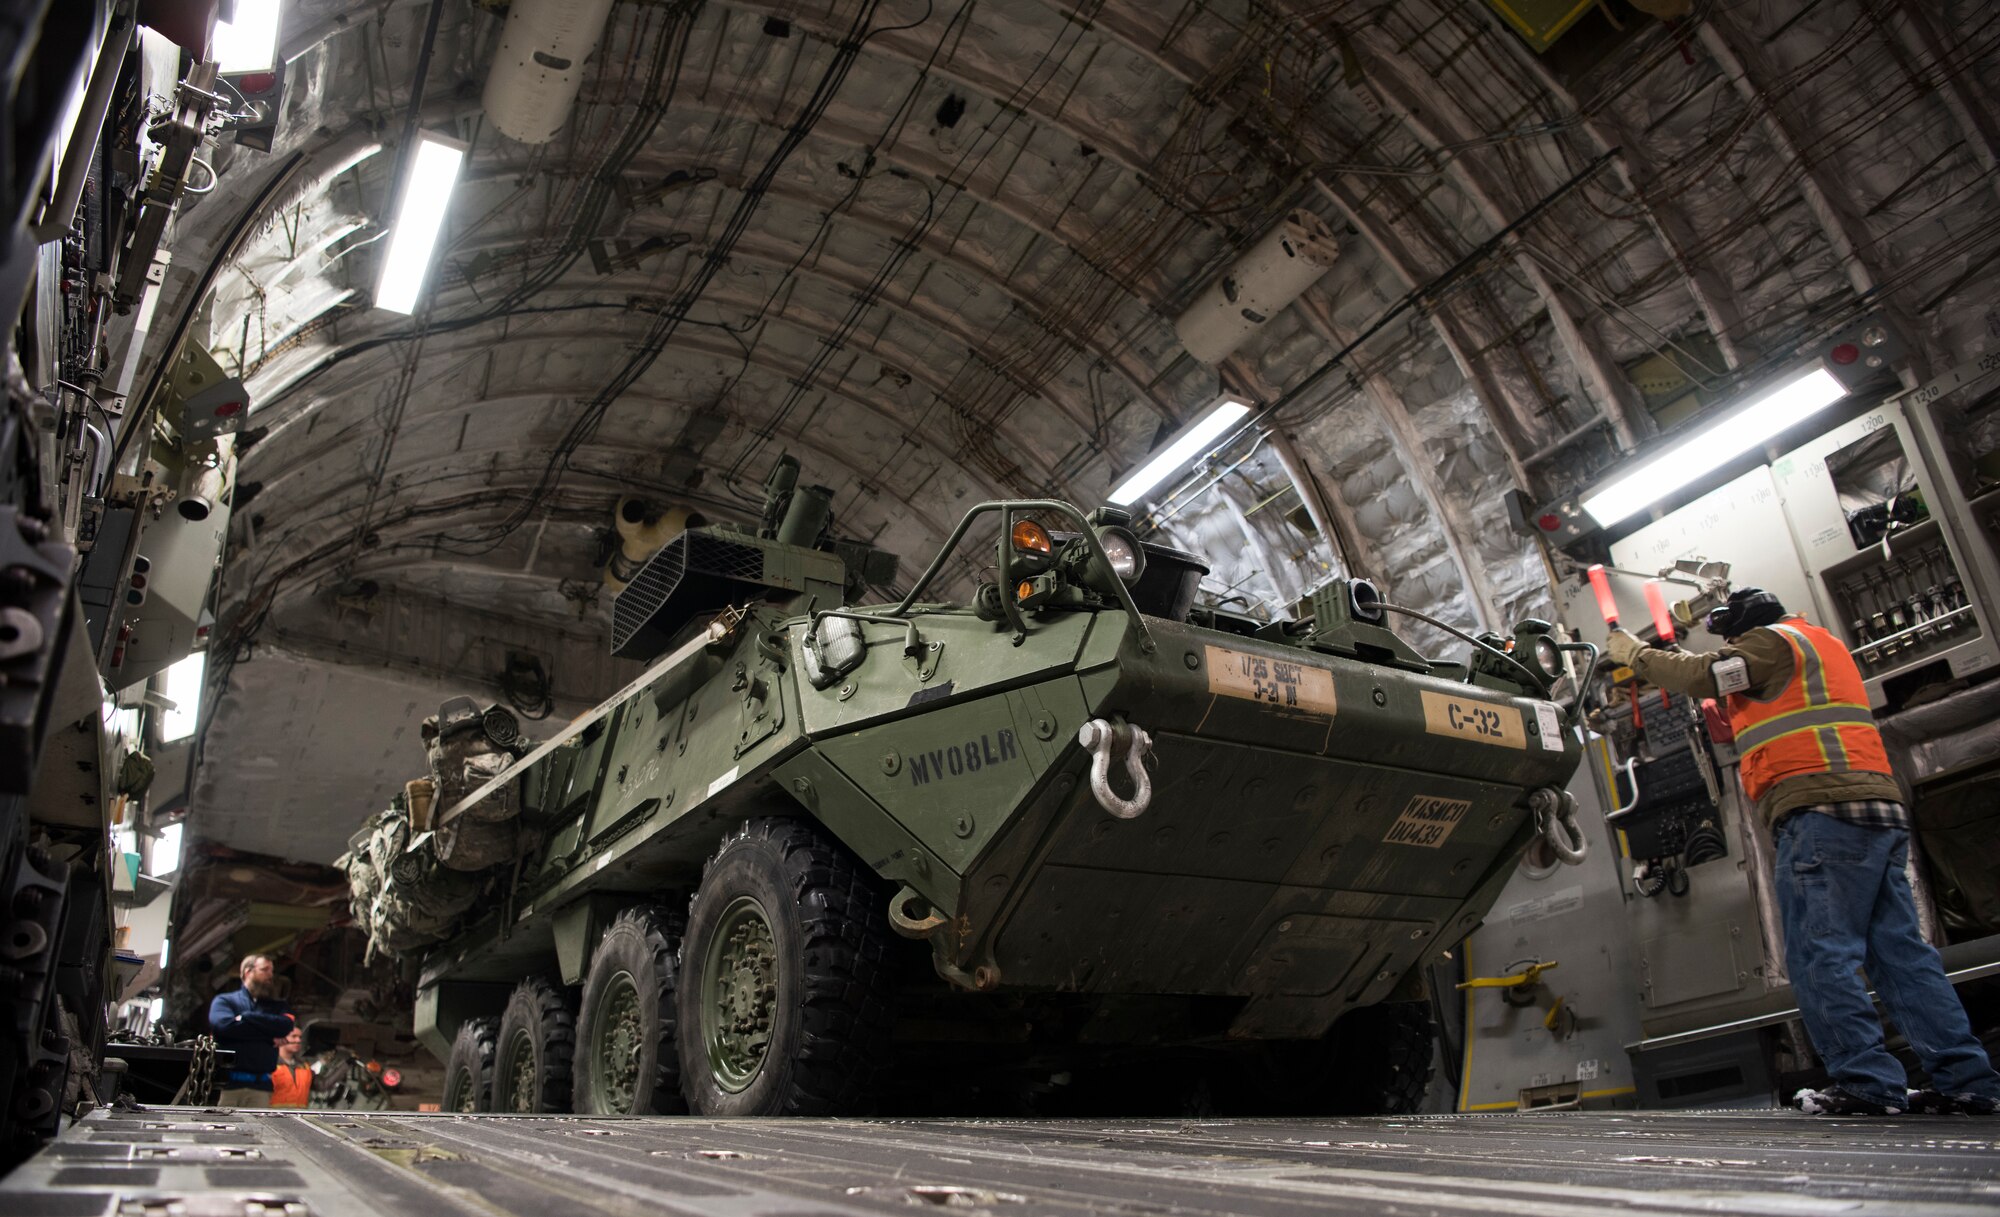 Danny Batchelor, 445th Expeditionary Aerial Port Squadron nightshift foreman, directs a U.S. Army Interim Armored Vehicle Stryker onto a C-17 Globemaster III at Elmendorf Air Force Base, Alaska, March 13, 2018. Airmen assigned to the 62nd Airlift Wing participated in the exercise to practice cold-weather operations. (U.S. Air Force photo by Senior Airman Tryphena Mayhugh)